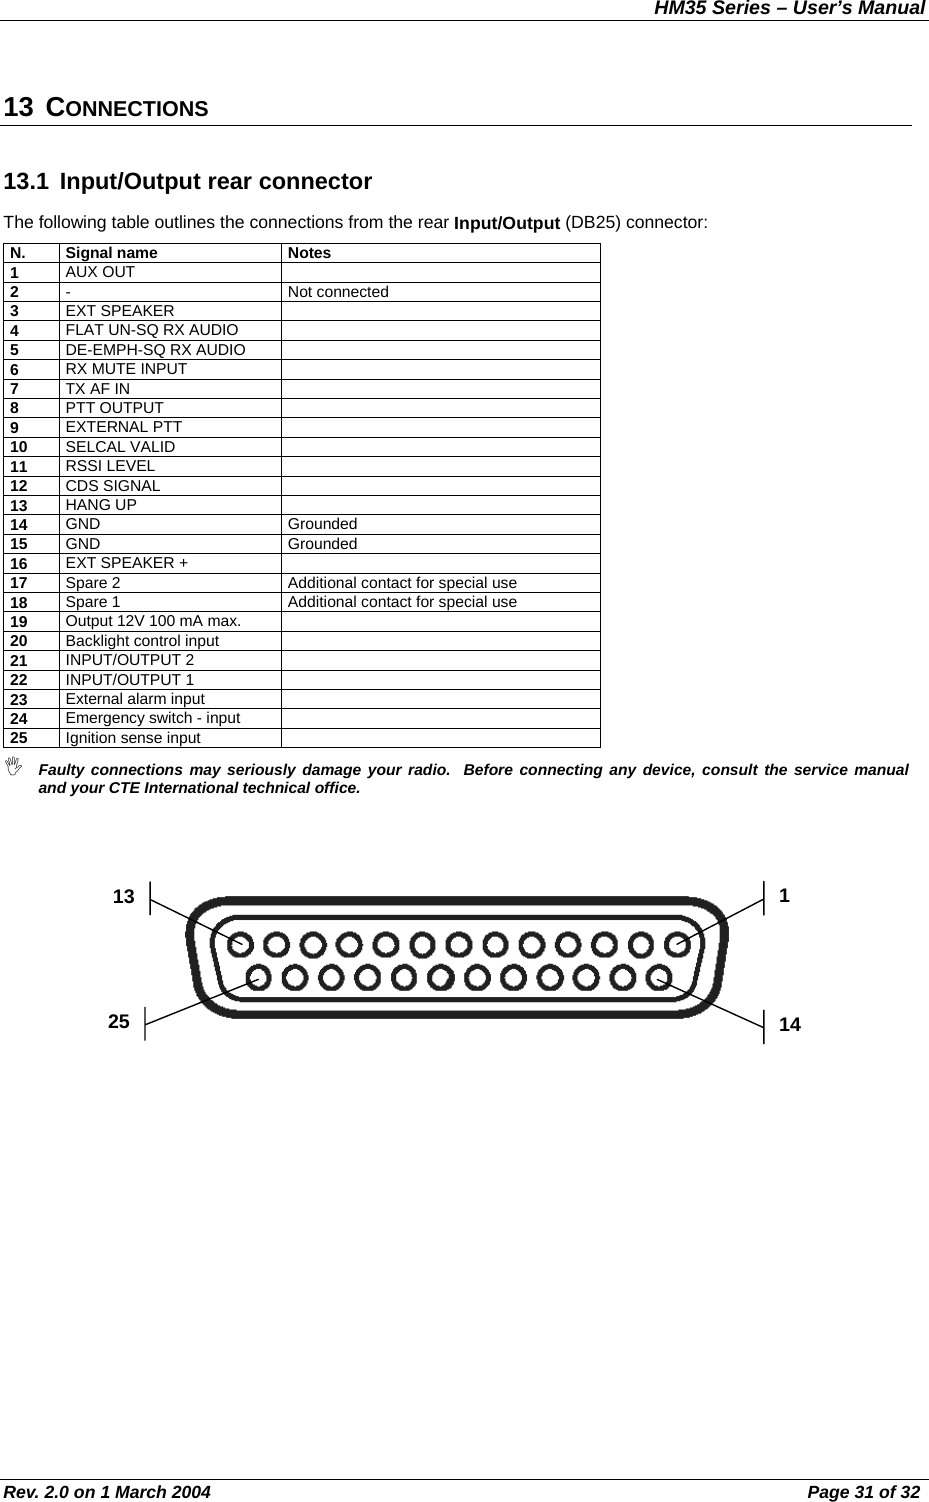 HM35 Series – User’s Manual Rev. 2.0 on 1 March 2004  Page 31 of 32 13 CONNECTIONS 13.1  Input/Output rear connector The following table outlines the connections from the rear Input/Output (DB25) connector: N. Signal name  Notes 1  AUX OUT   2  - Not connected 3  EXT SPEAKER   4  FLAT UN-SQ RX AUDIO   5  DE-EMPH-SQ RX AUDIO   6  RX MUTE INPUT   7  TX AF IN   8  PTT OUTPUT   9  EXTERNAL PTT   10  SELCAL VALID   11  RSSI LEVEL   12  CDS SIGNAL   13  HANG UP   14  GND Grounded 15  GND Grounded 16  EXT SPEAKER +   17  Spare 2  Additional contact for special use 18  Spare 1  Additional contact for special use 19  Output 12V 100 mA max.   20  Backlight control input   21  INPUT/OUTPUT 2   22  INPUT/OUTPUT 1   23  External alarm input   24  Emergency switch - input   25  Ignition sense input    Faulty connections may seriously damage your radio.  Before connecting any device, consult the service manual and your CTE International technical office.      1 13 25 14 